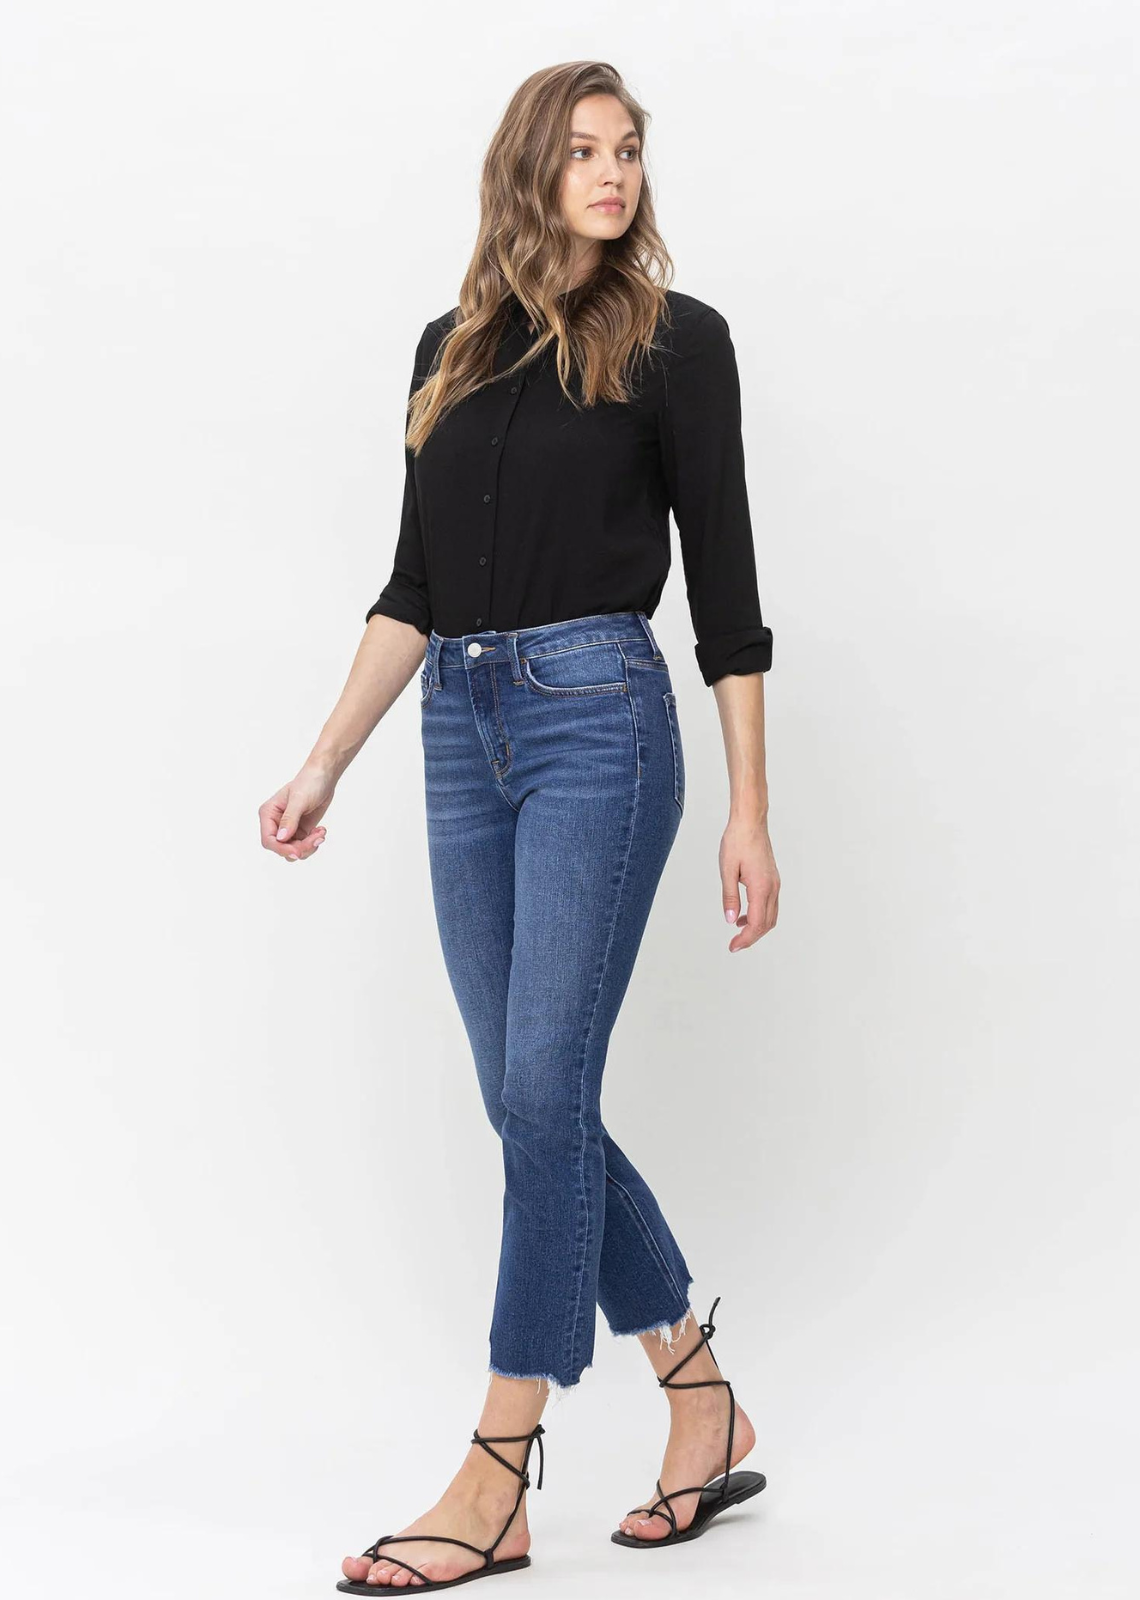 Flying Monkey Cropped Slim Straight - Effusive. Effusive jeans exude effortless style with their comfortable stretch denim, high rise waist, and chic frayed step hem. The cropped length and slim straight cut elevate any look to a level of fashionable refinement.